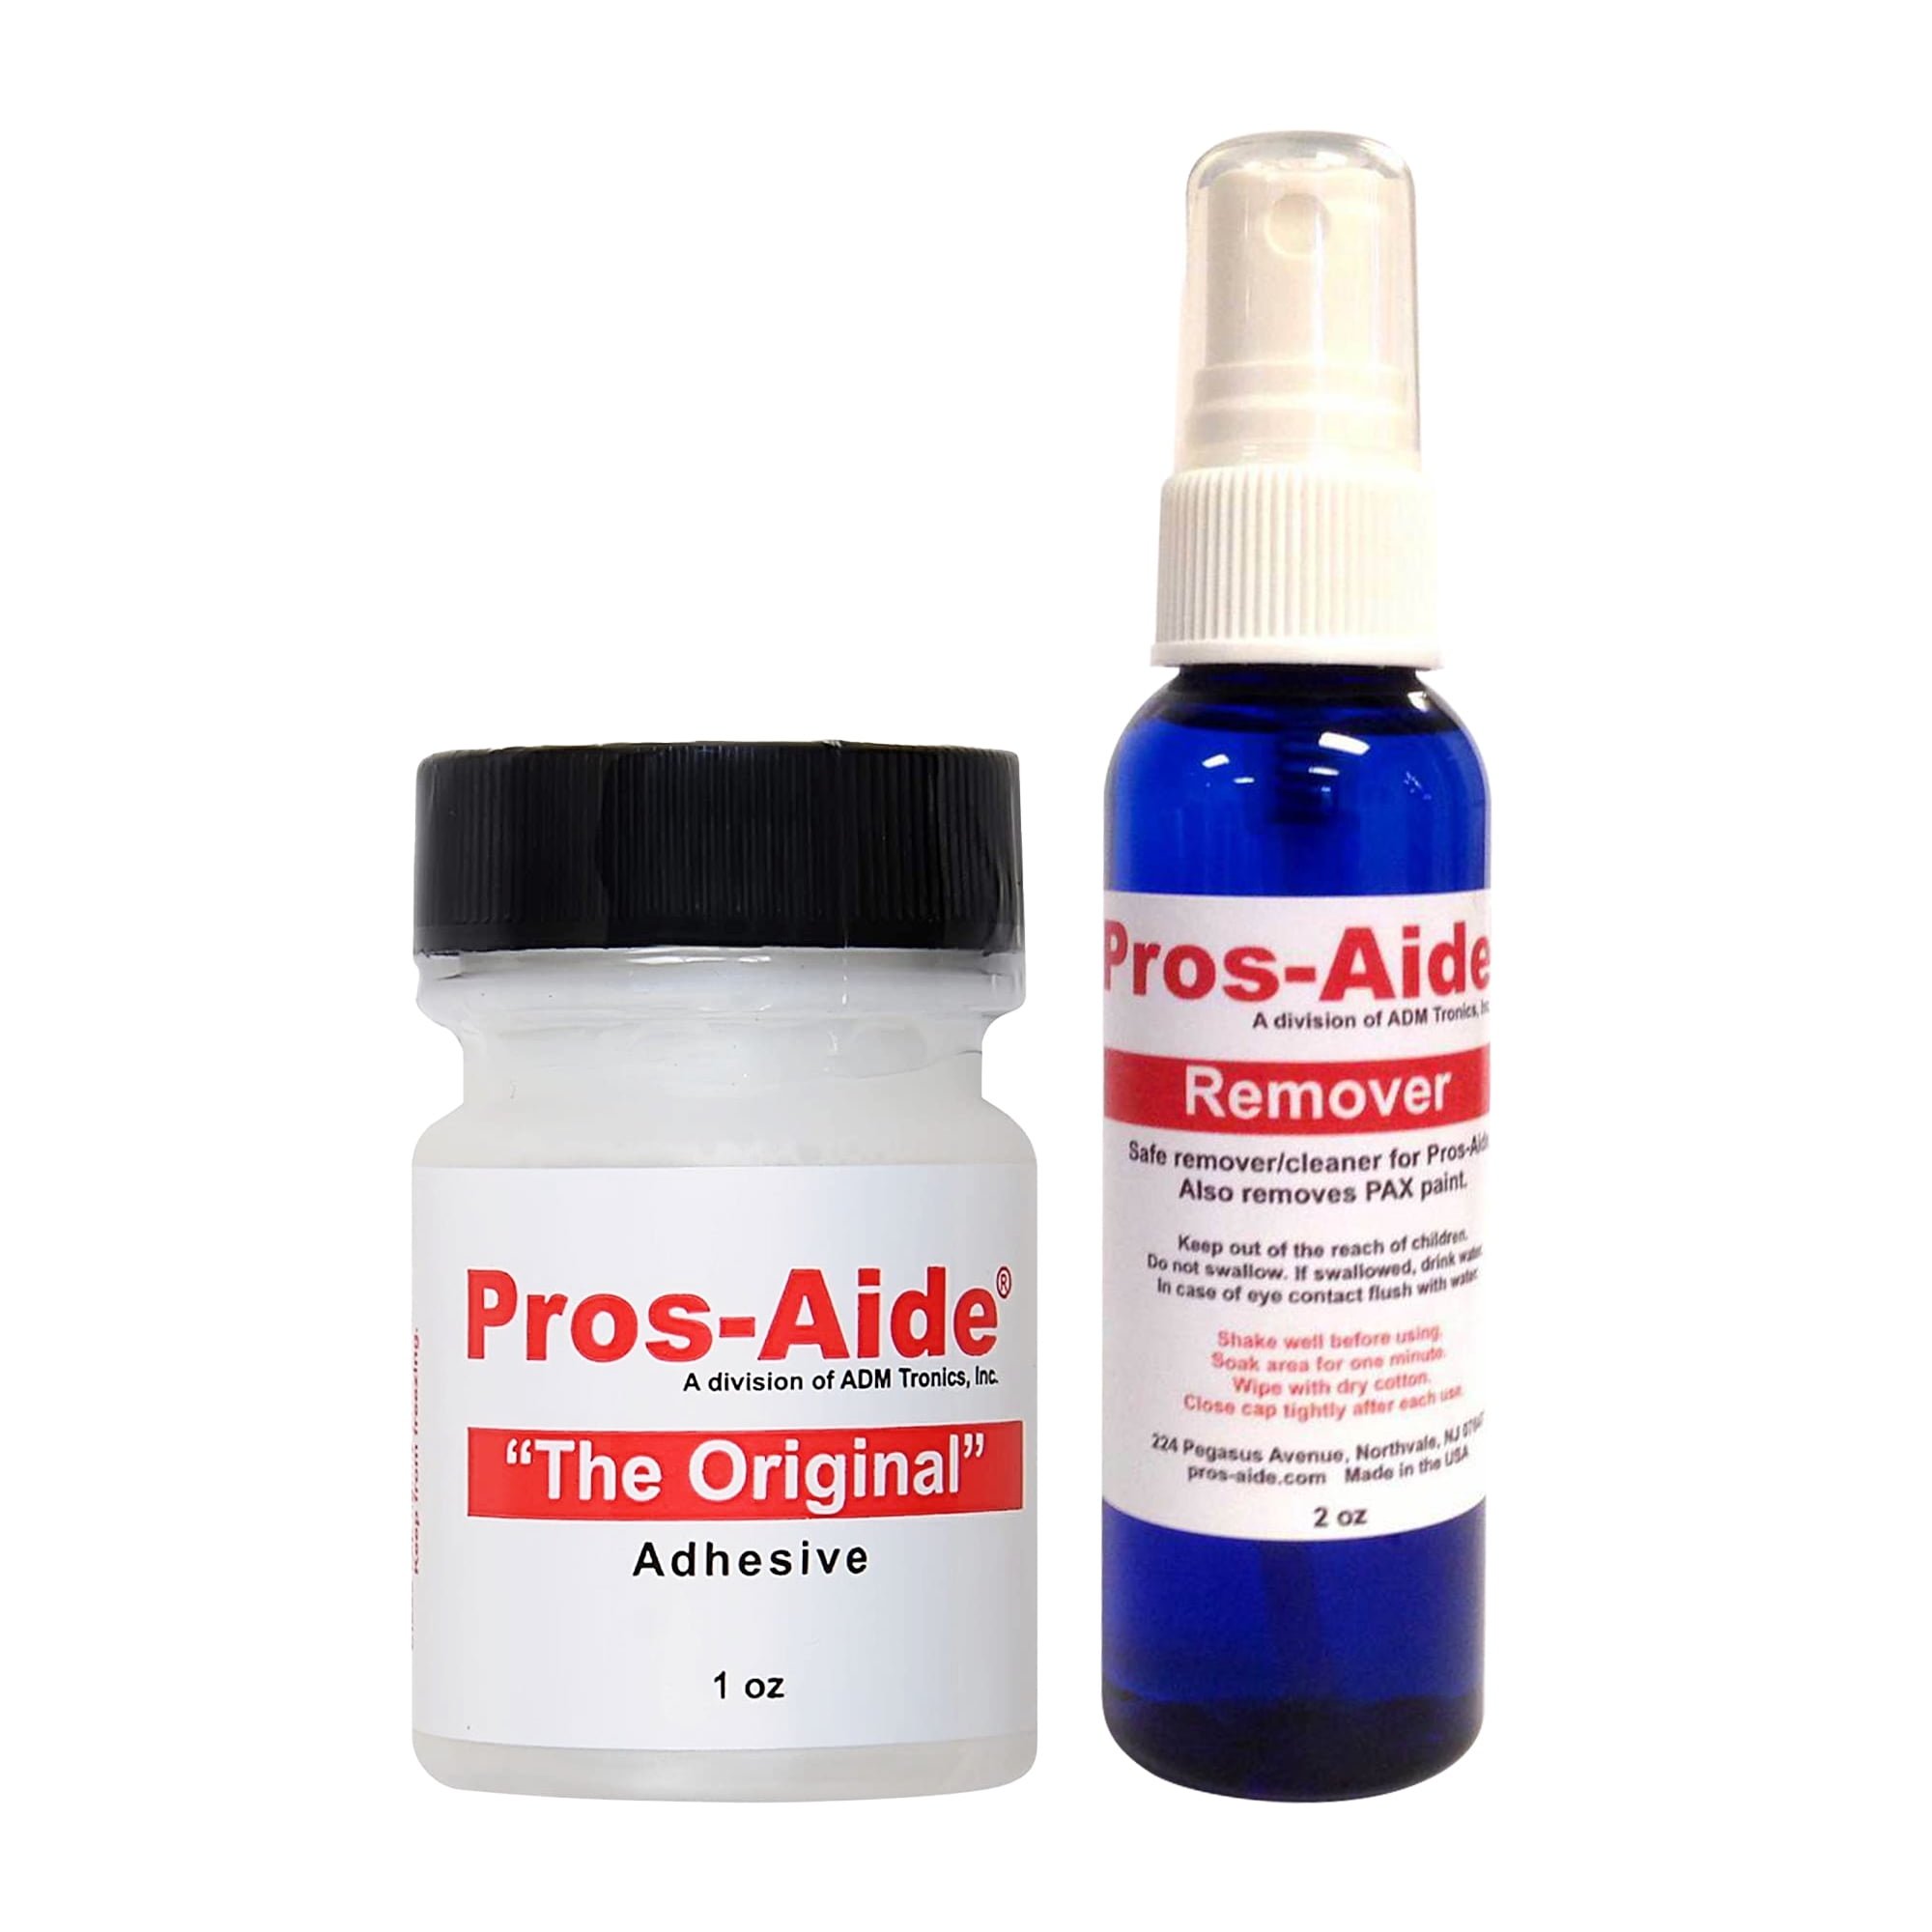 Pros-Aide Cream Adhesive 6 Oz. Jar - Official Product of ADM tronics